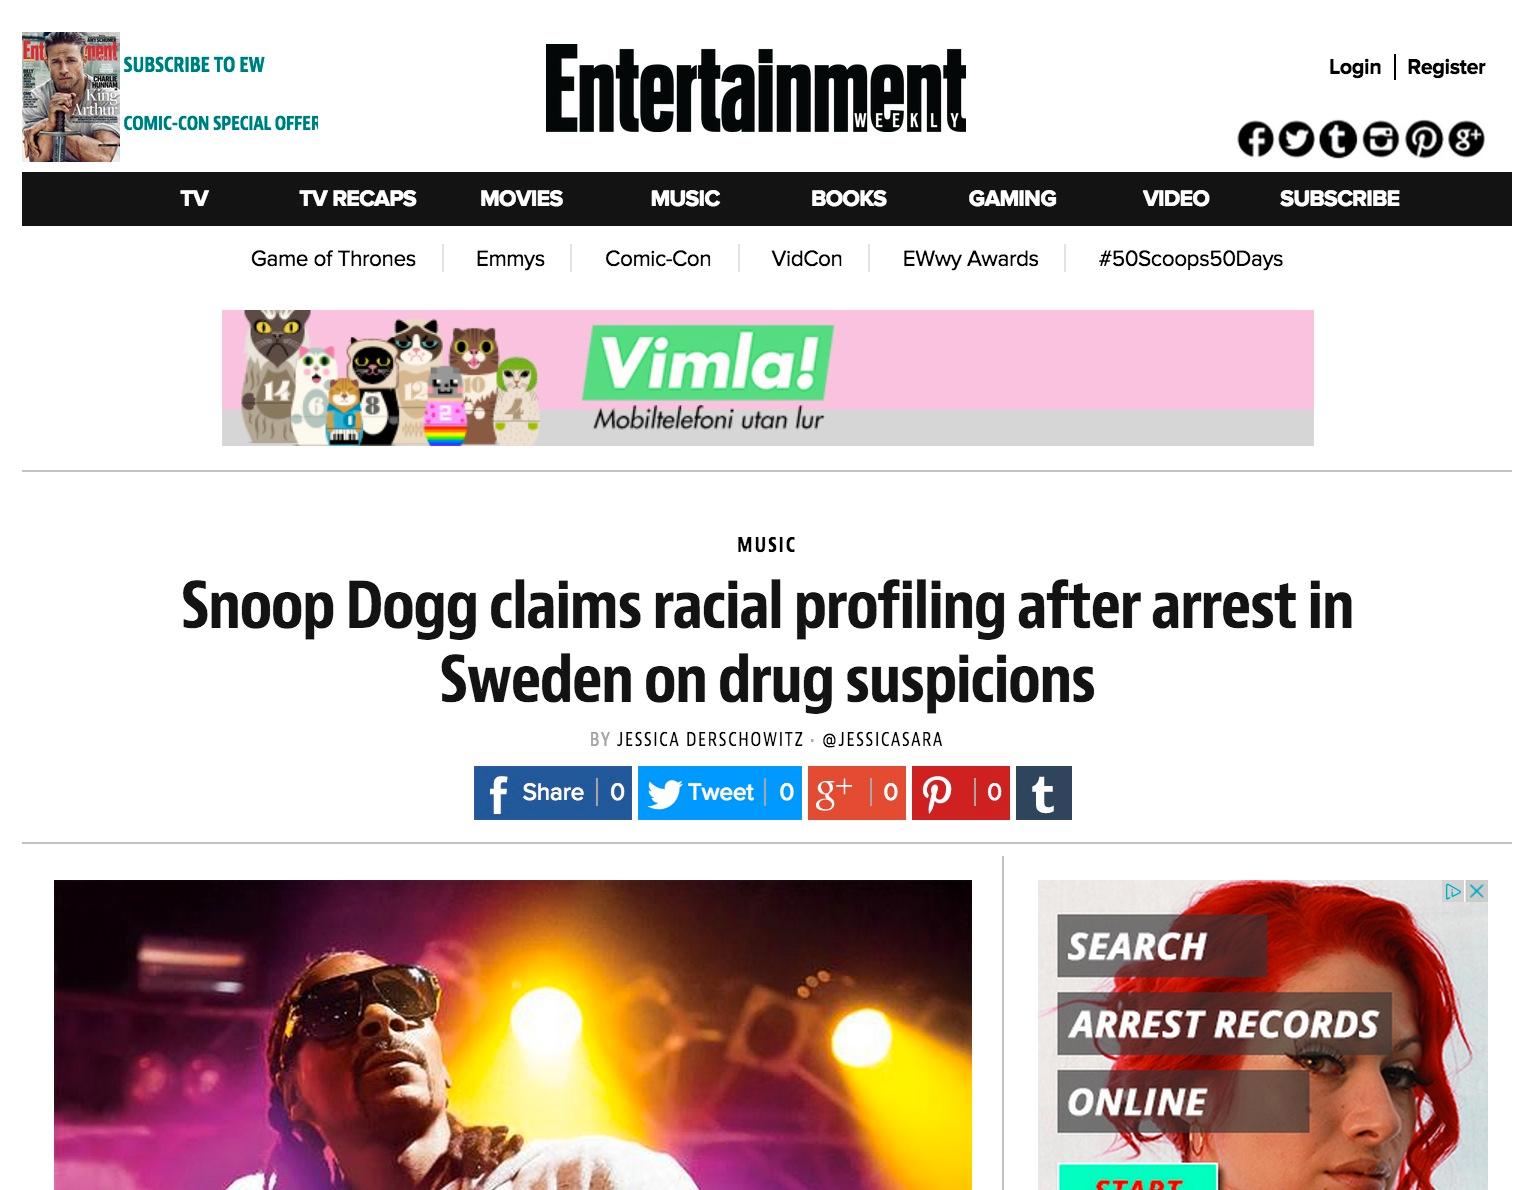 Entertainment Weekly Snoop Dogg claims racial profiling after arrest in Sweden on drug suspicions